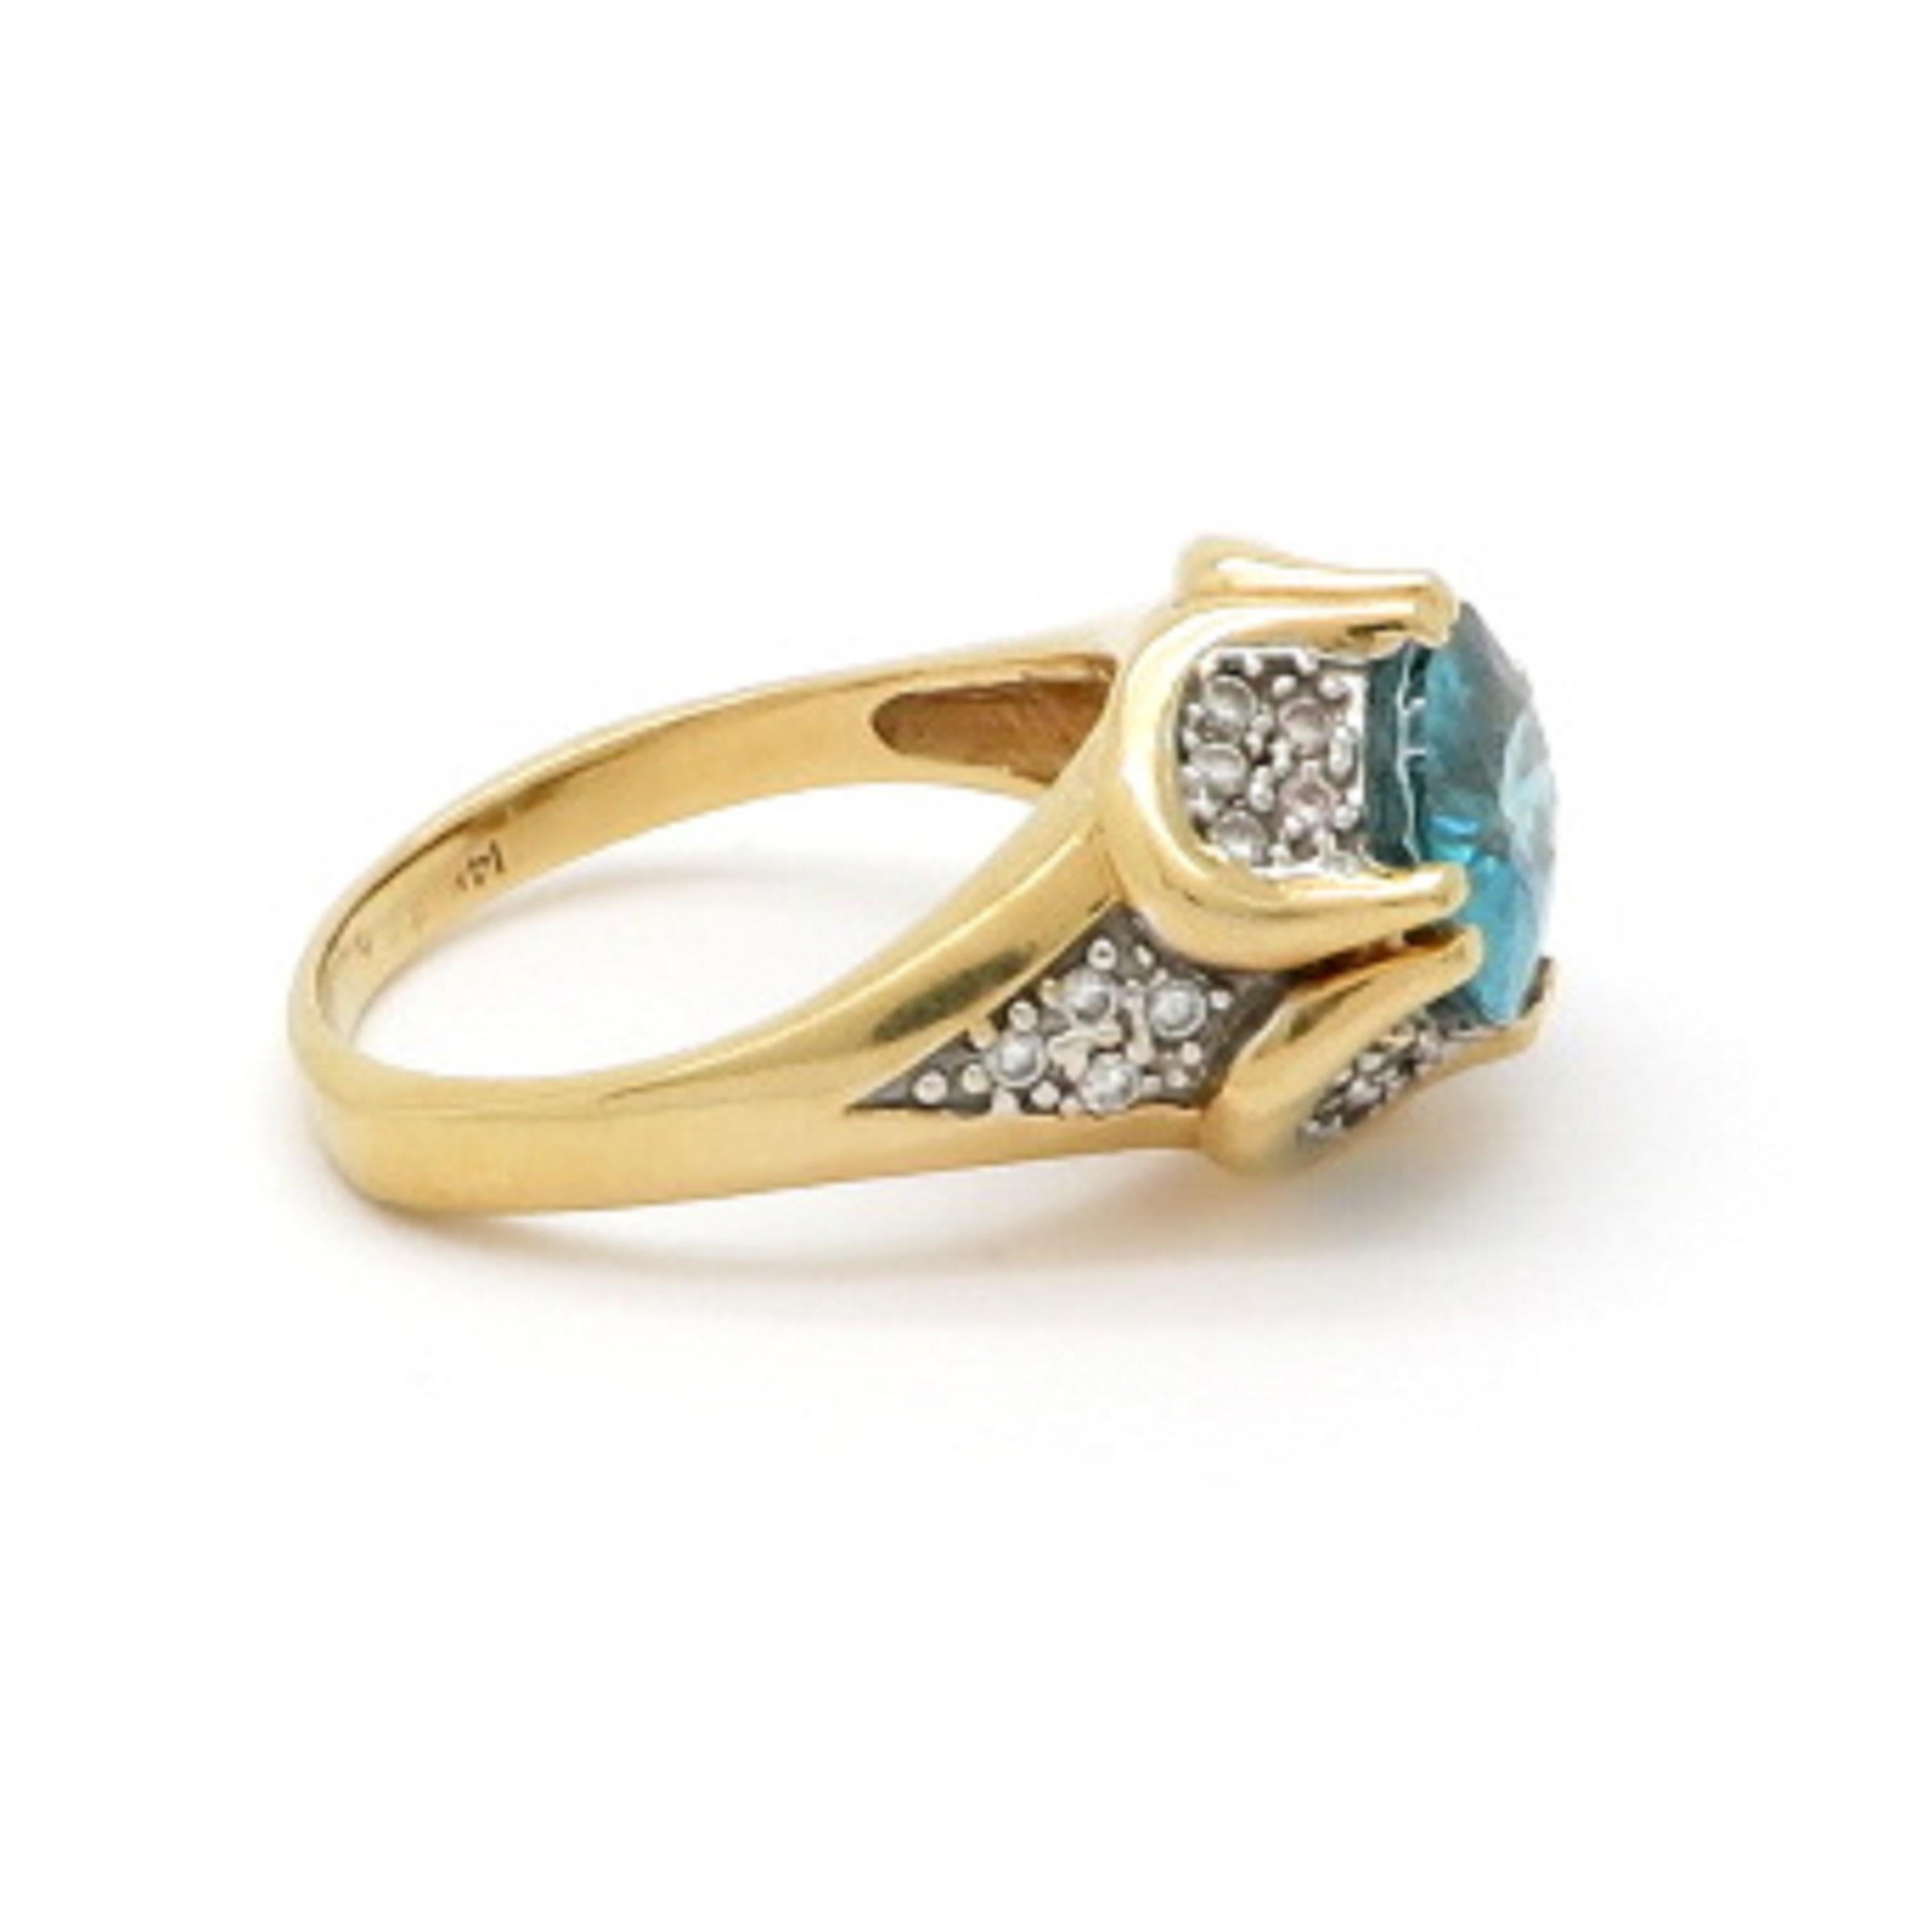 Estate 14 Karat Yellow Gold 5.00 Carat Blue Zircon and Diamond Ring In Excellent Condition For Sale In Scottsdale, AZ